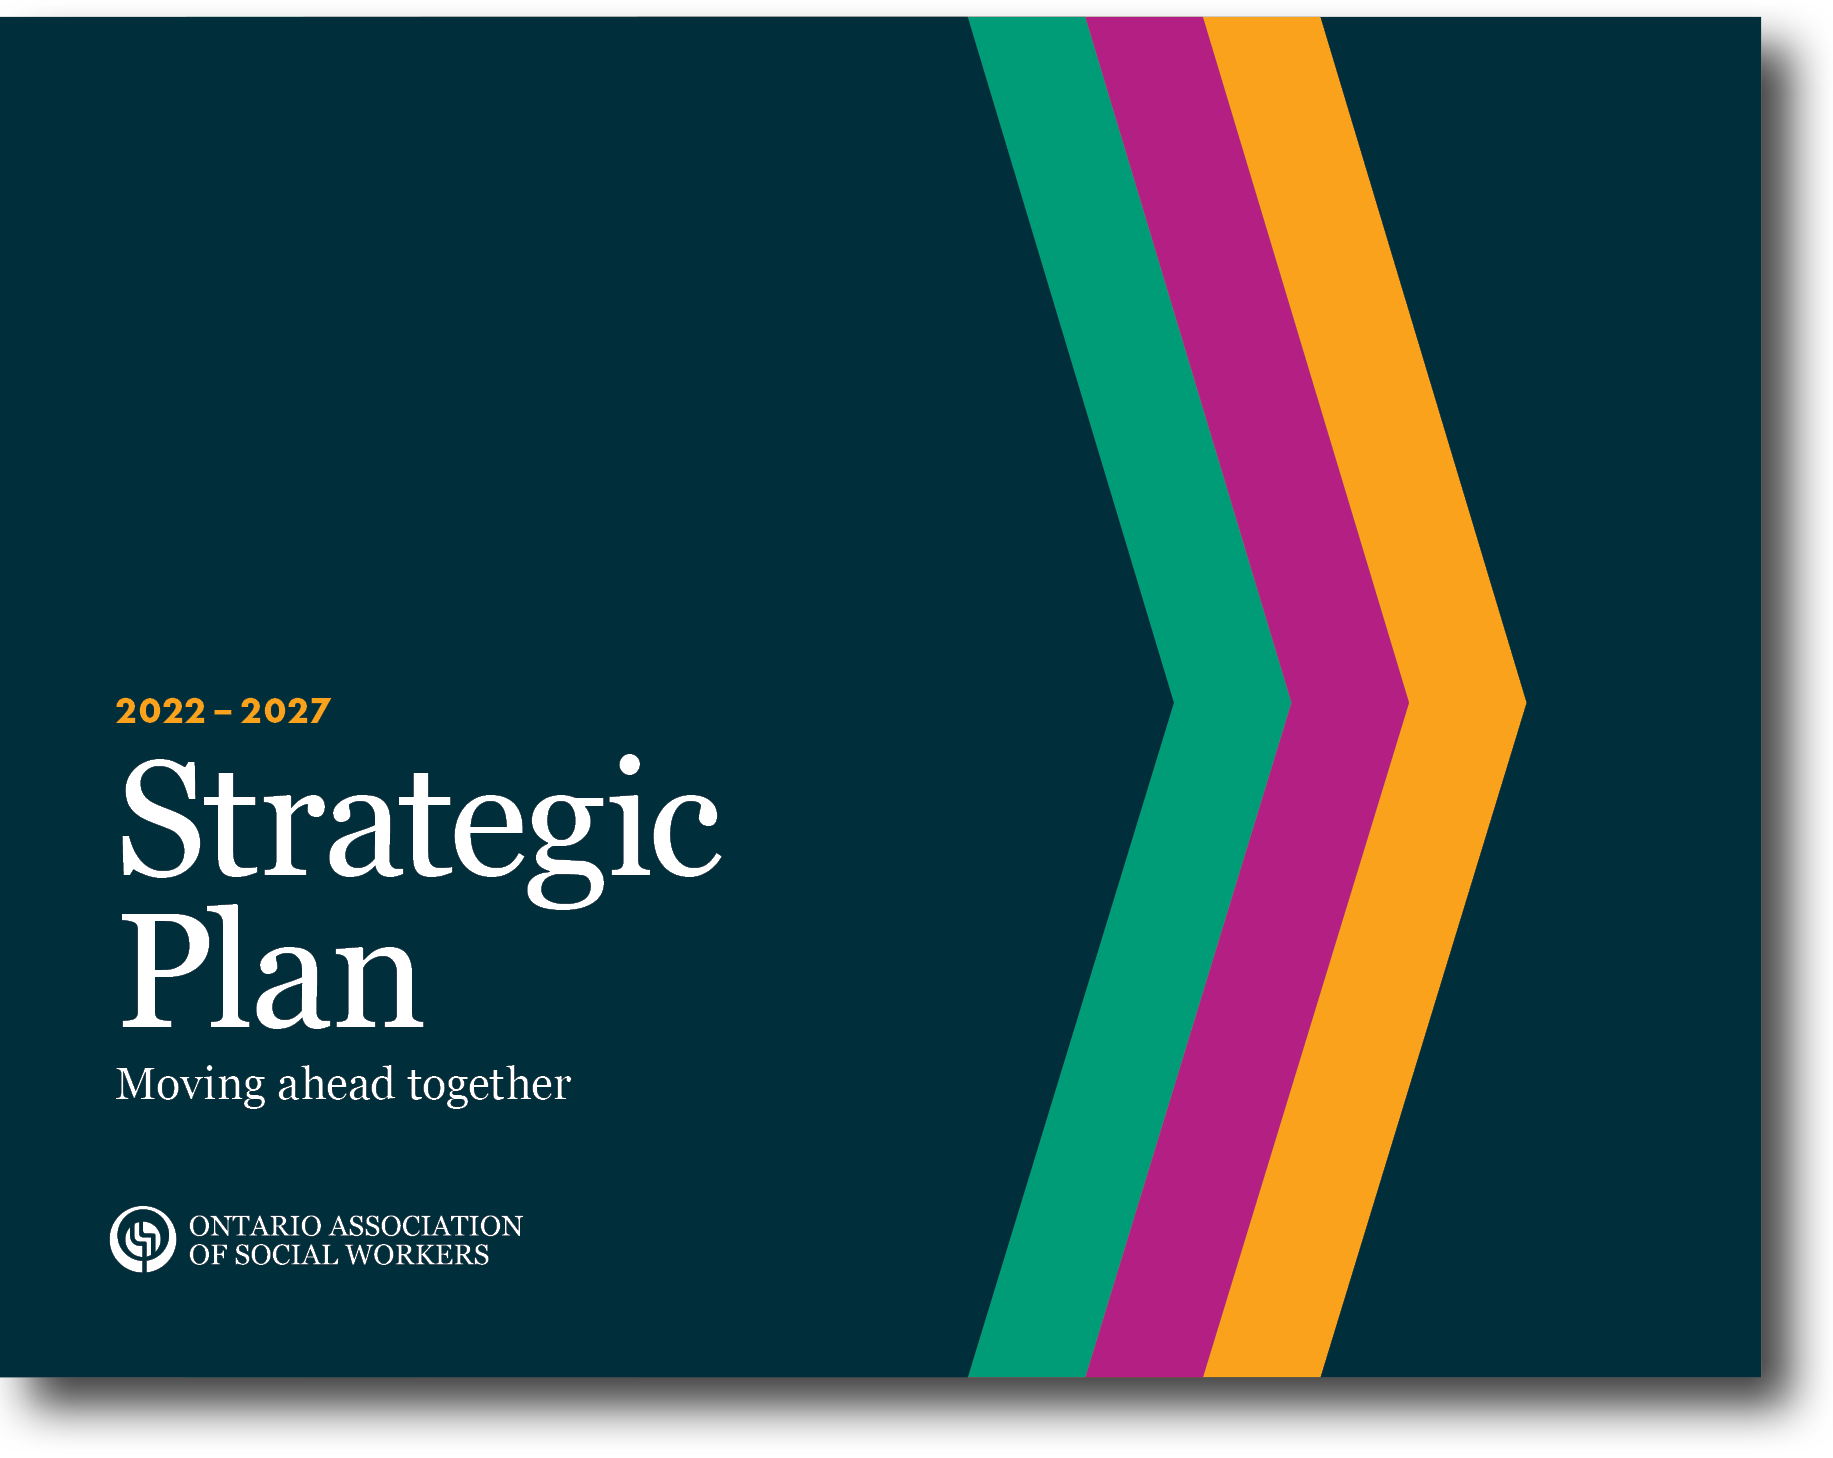 Cover page of summary version of OASW's 2022-2027 Strategic Plan